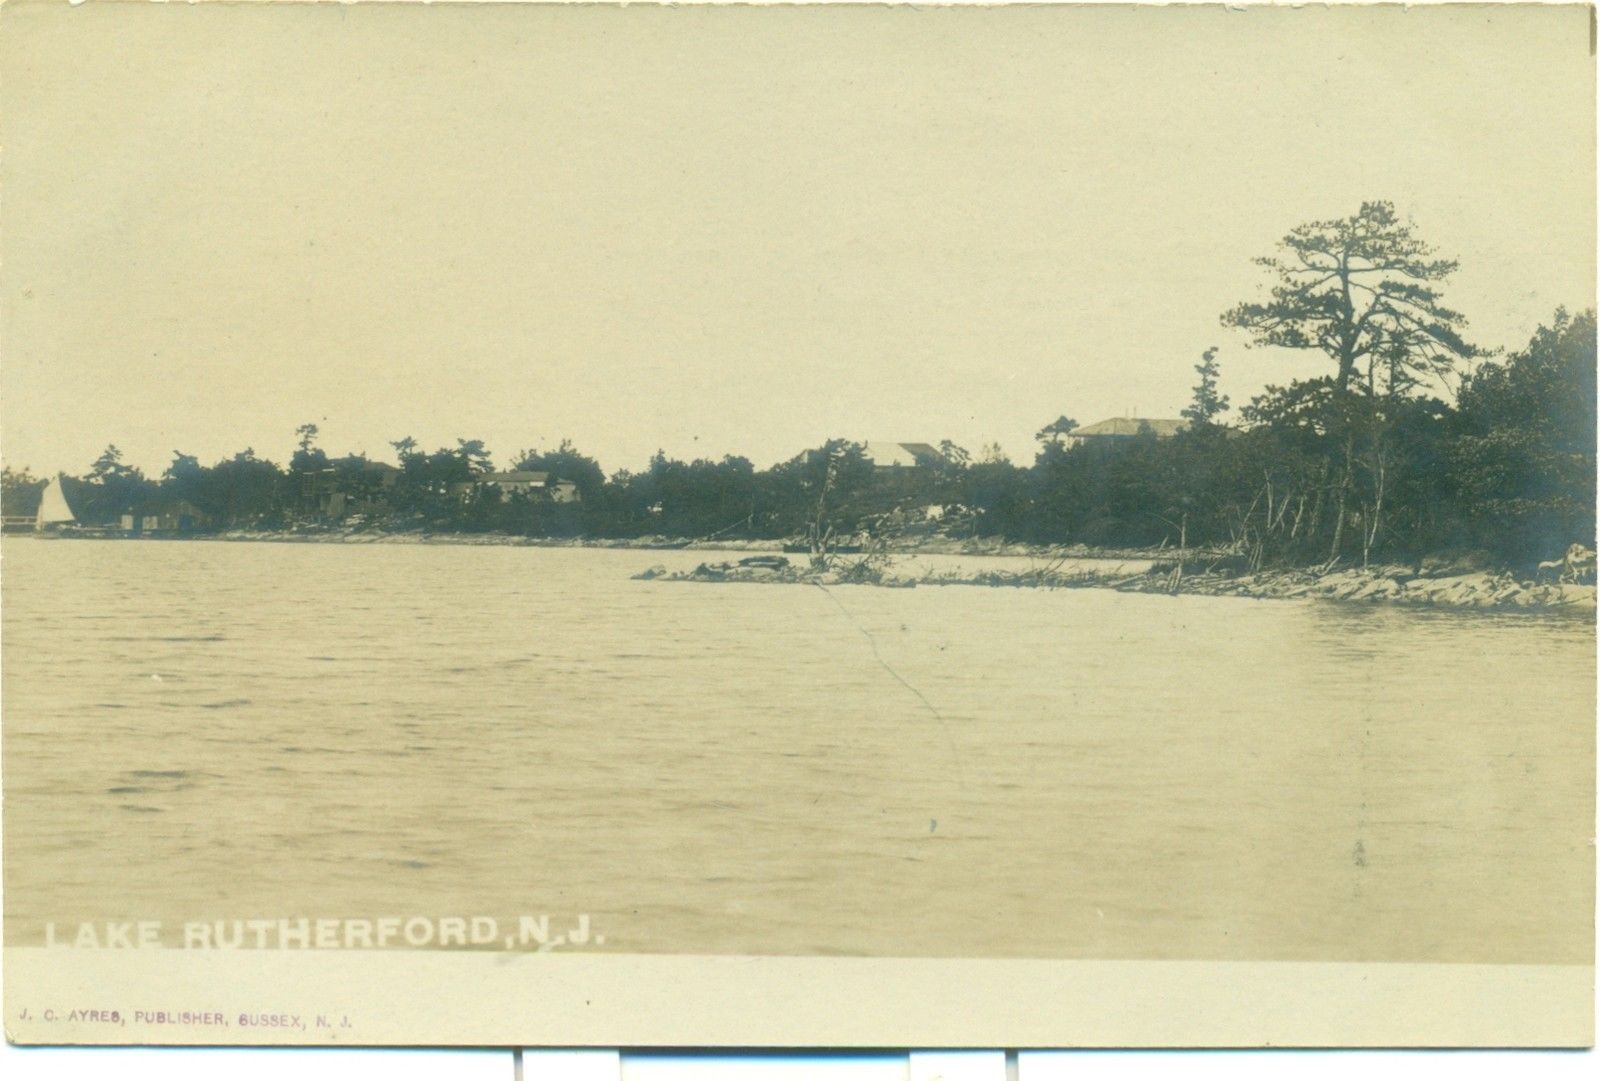 Colesville - Sussex County - Lake Rutherford - c 1910